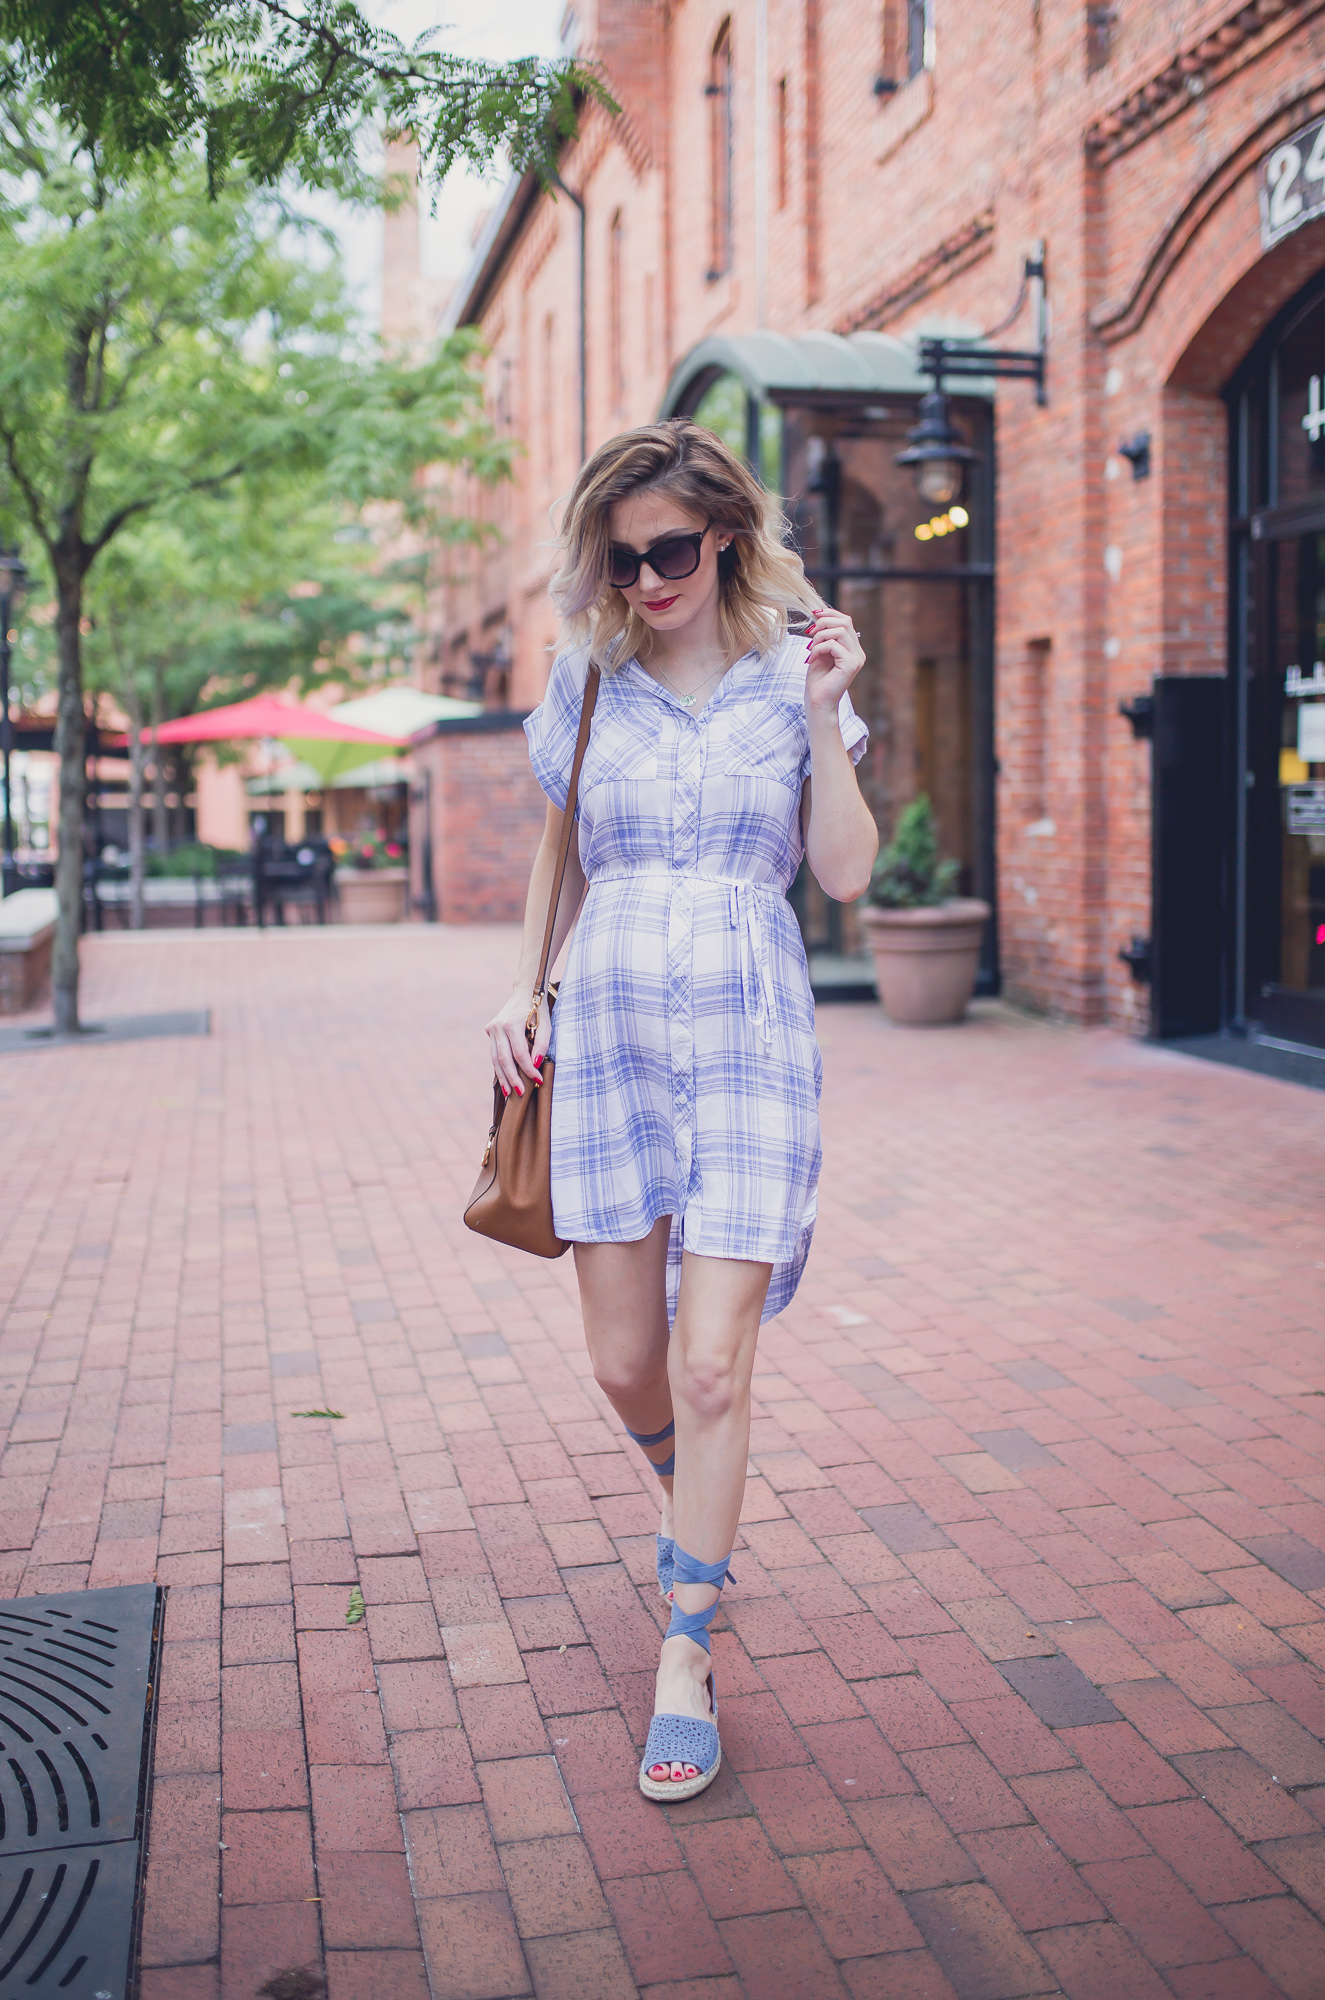 Fashion, lifestyle, and beauty blogger/ vlogger Jessica Linn on Linn Style wearing a summer blue and white plaid button up t-shirt dress from Ross, lace up blue sandals from Report footwear, and jewelry from local Cary North Carolina business CY Design Studio and lipstick from locally made all natural organic lipstick from SumerReign Cosmetics by Ashley Summerville in Durham NC.